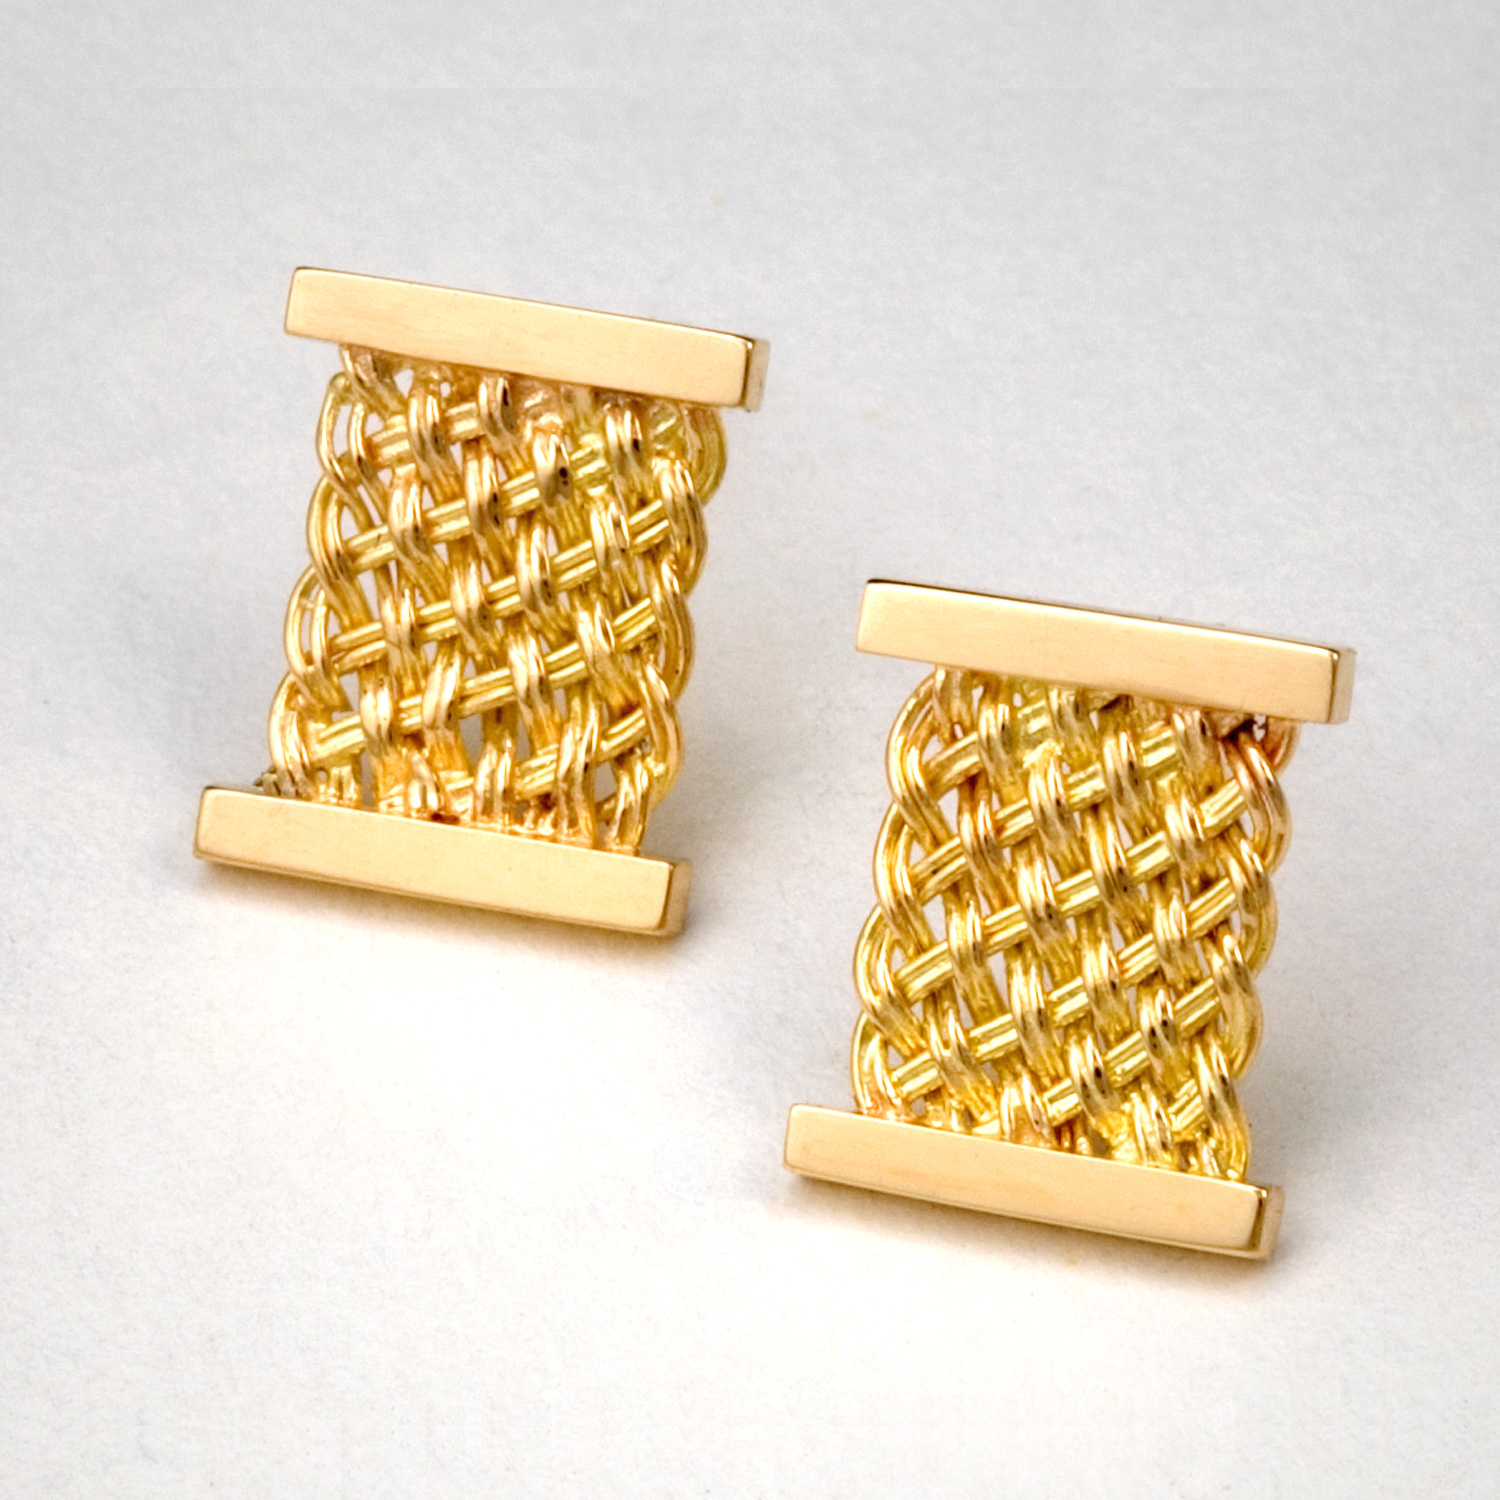 Bar Island Square Earrings in 18k yellow gold by Tamberlaine